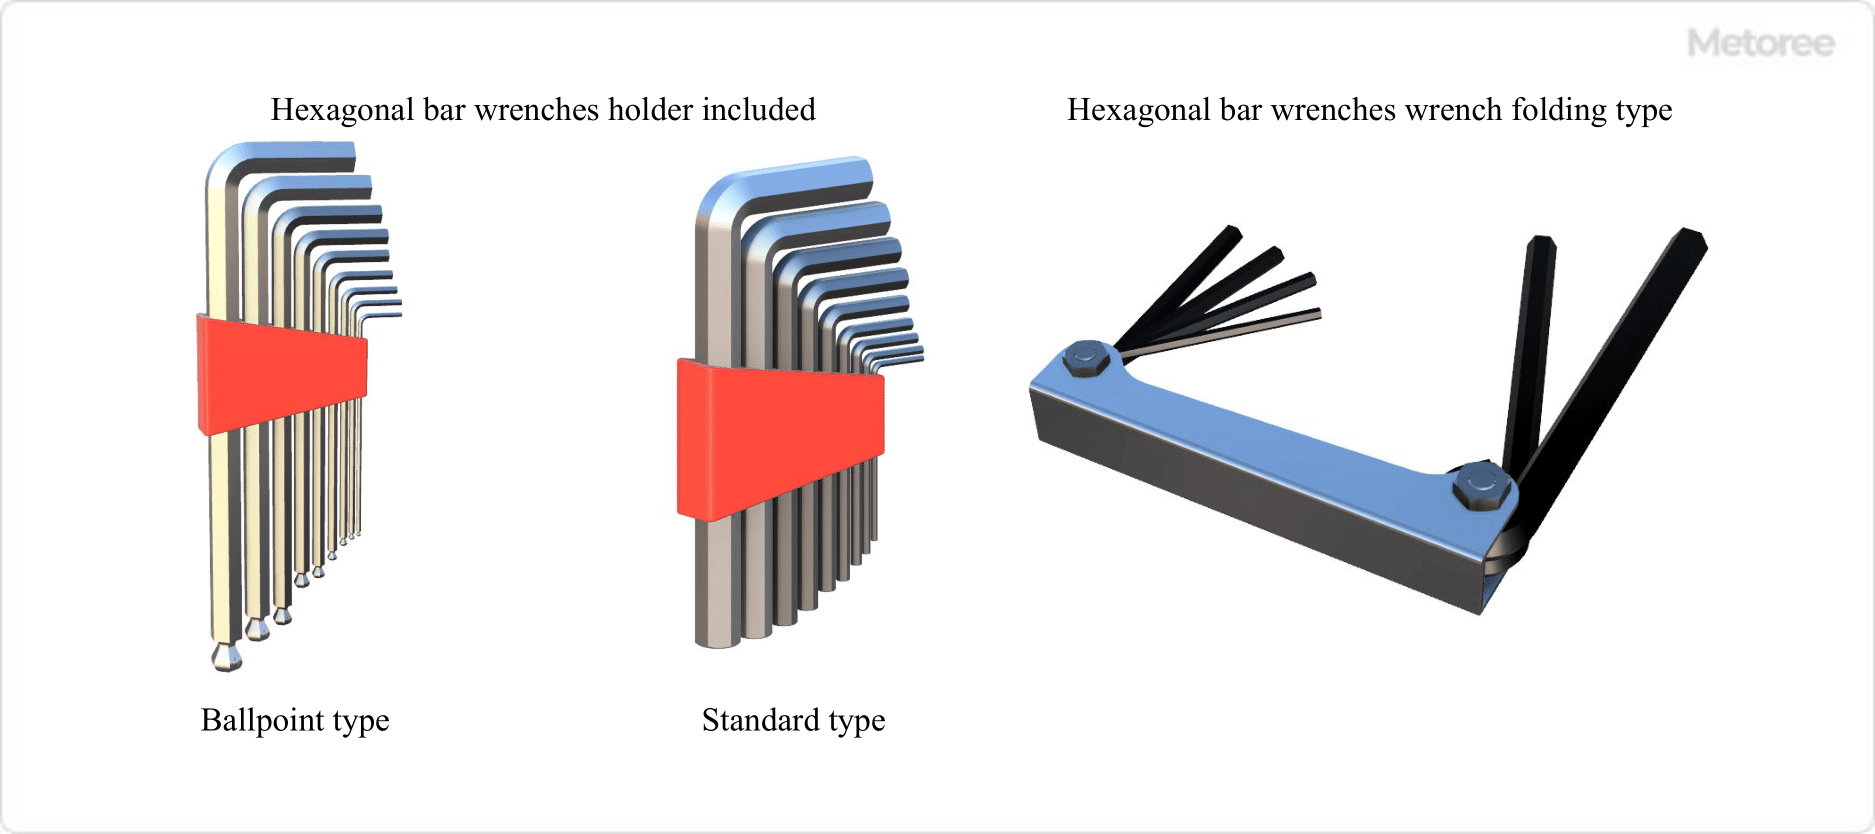 Figure 3. Hexagonal bar wrenches with holder and folding type